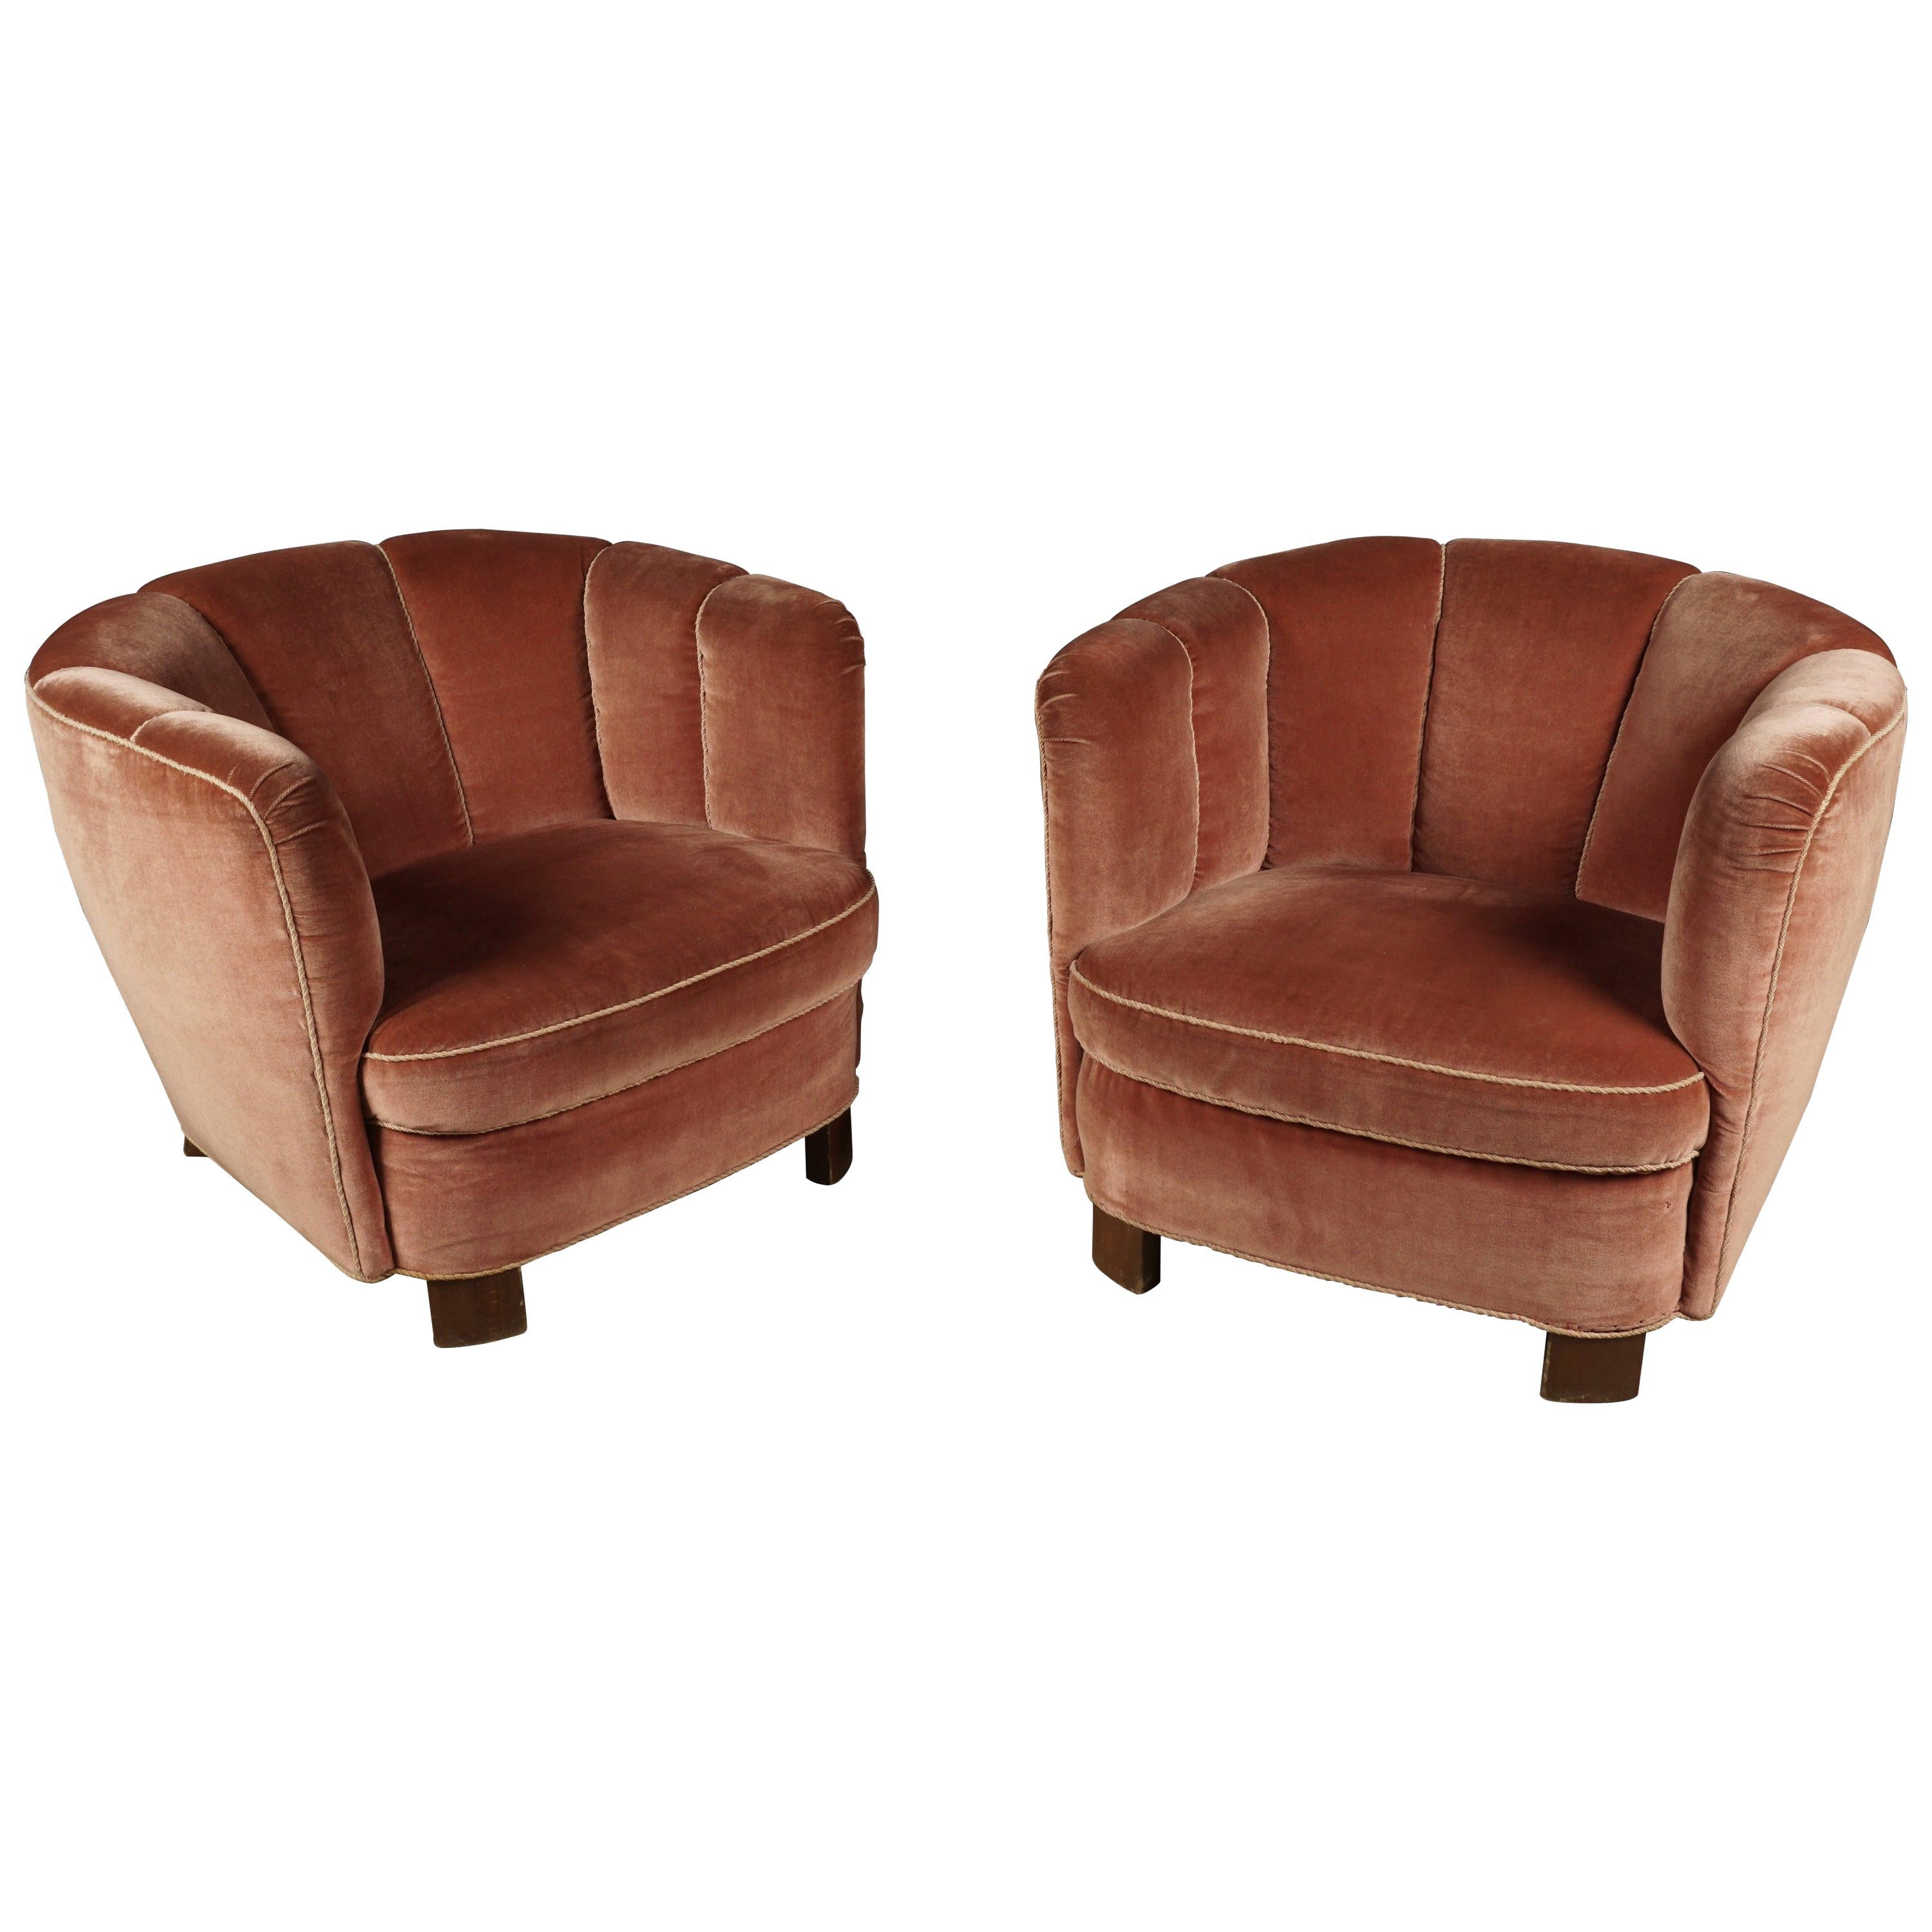 Vintage Pair of Art Deco Lounge Chairs from Denmark, circa 1950